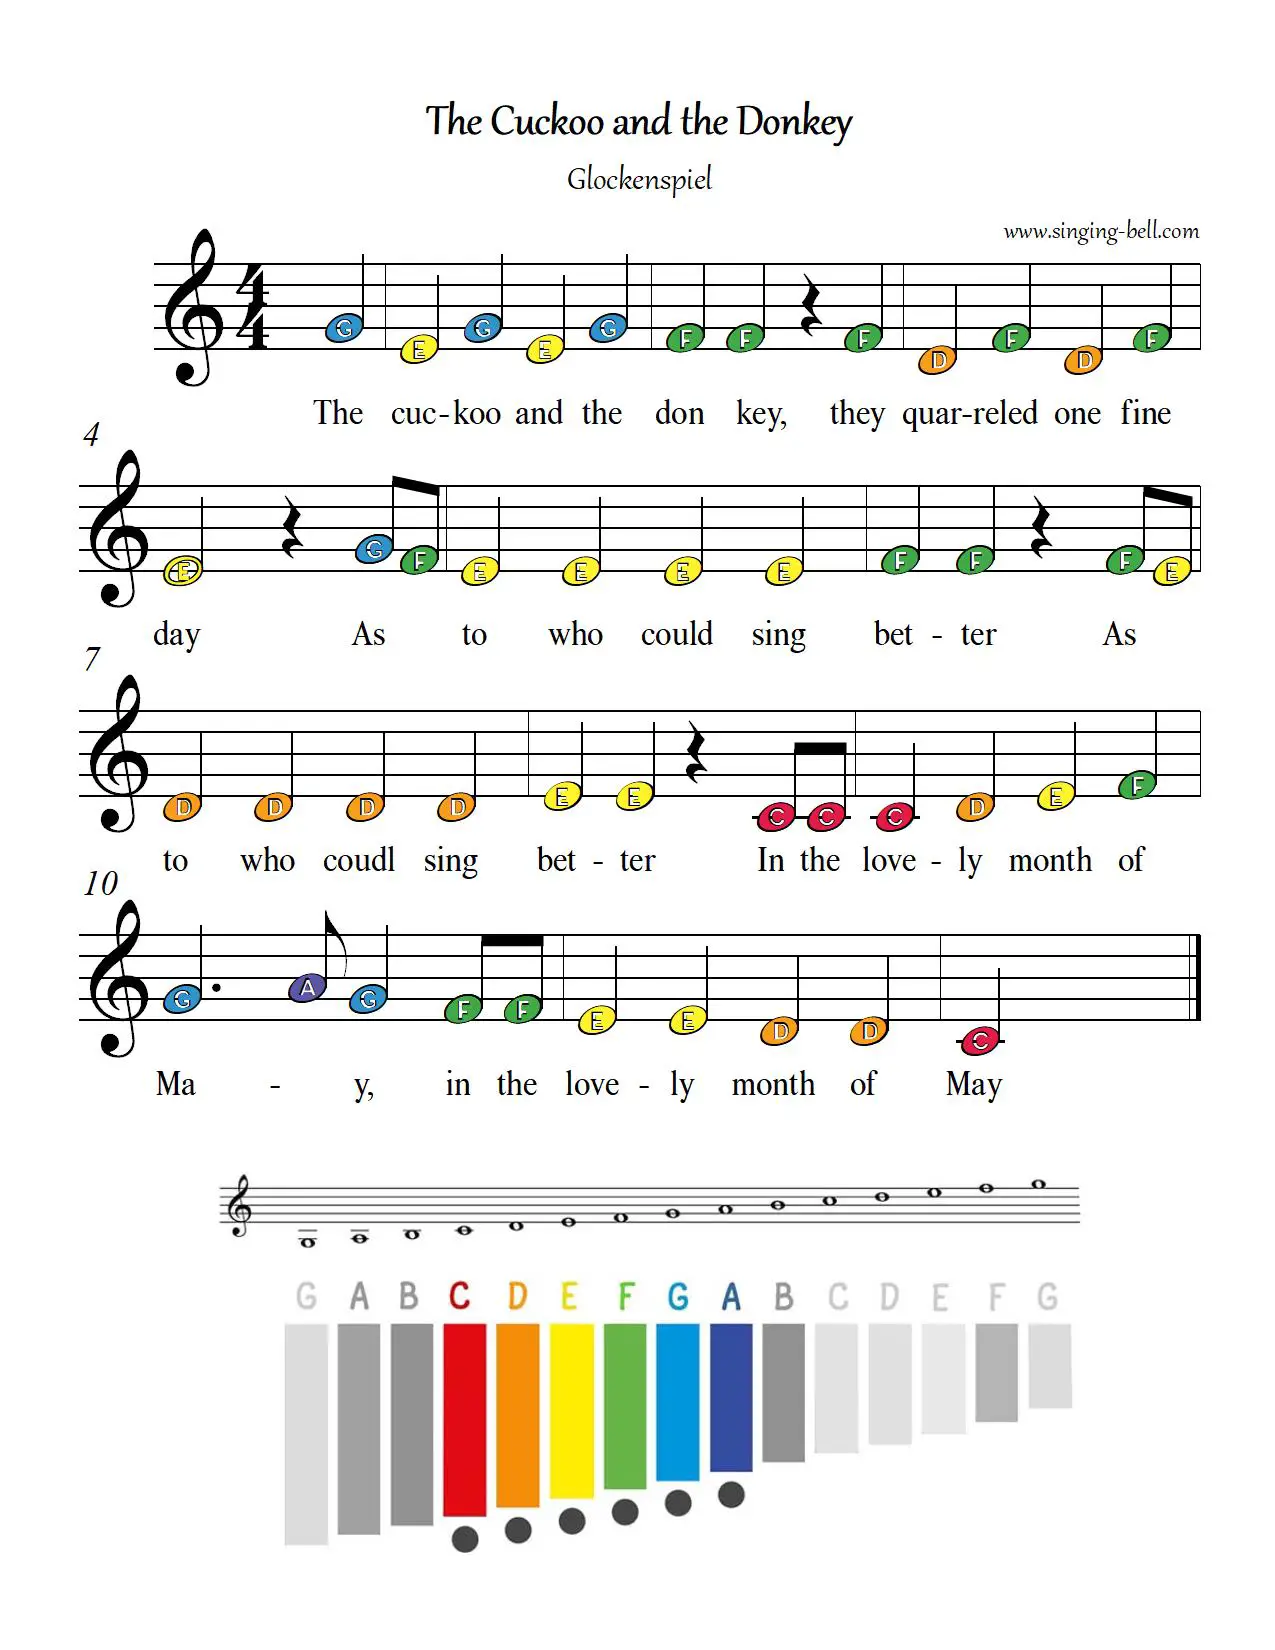 The Cuckoo and the Donkey free xylophone glockenspiel sheet music color notes chart pdf